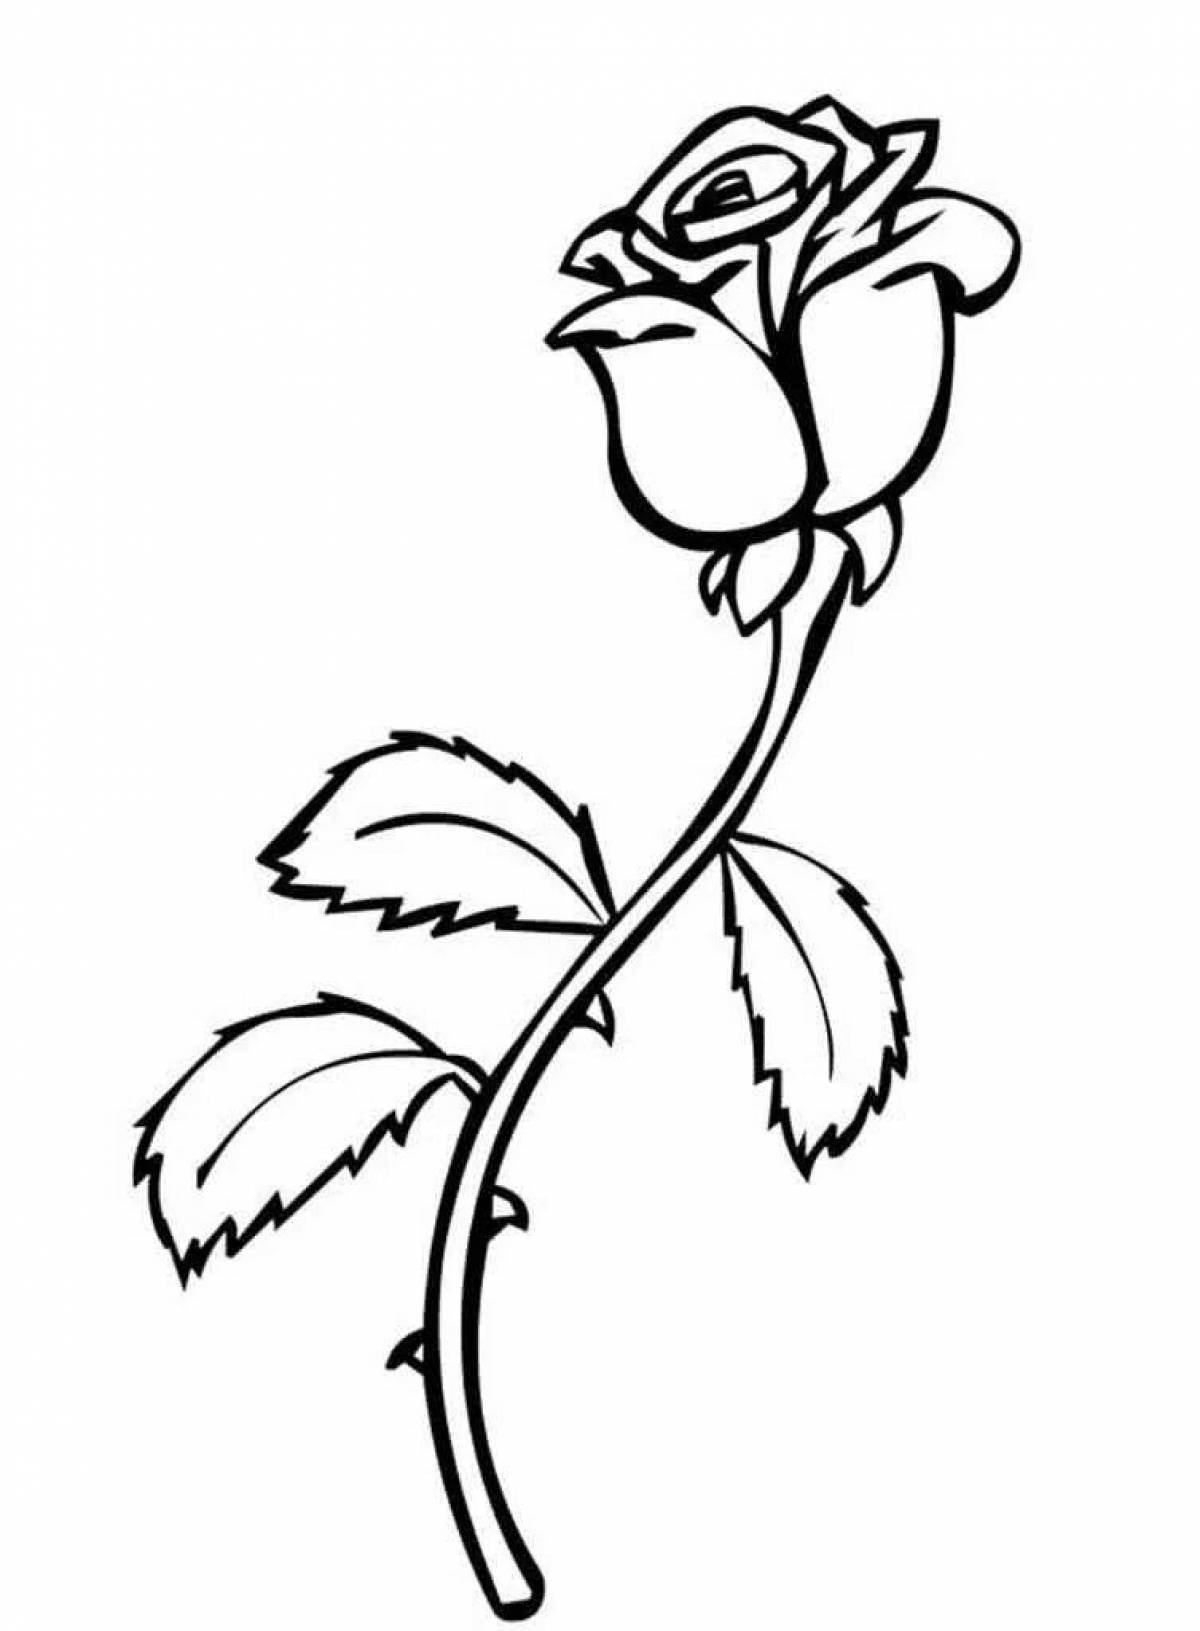 Flawless rose coloring page